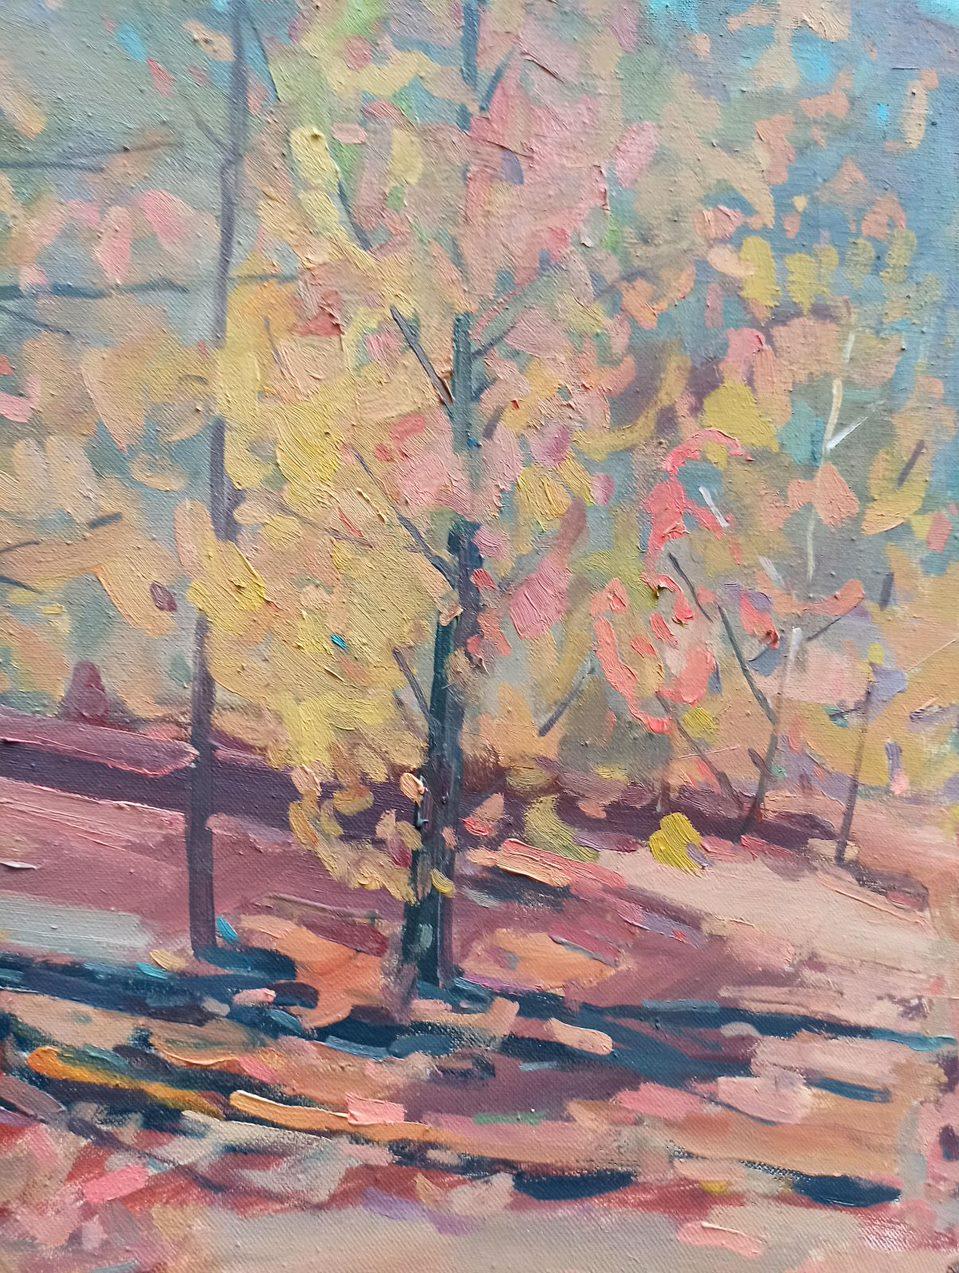 Autumn Landscape, Original oil Painting, Ready to Hang - Gray Landscape Painting by Peter Tovpev